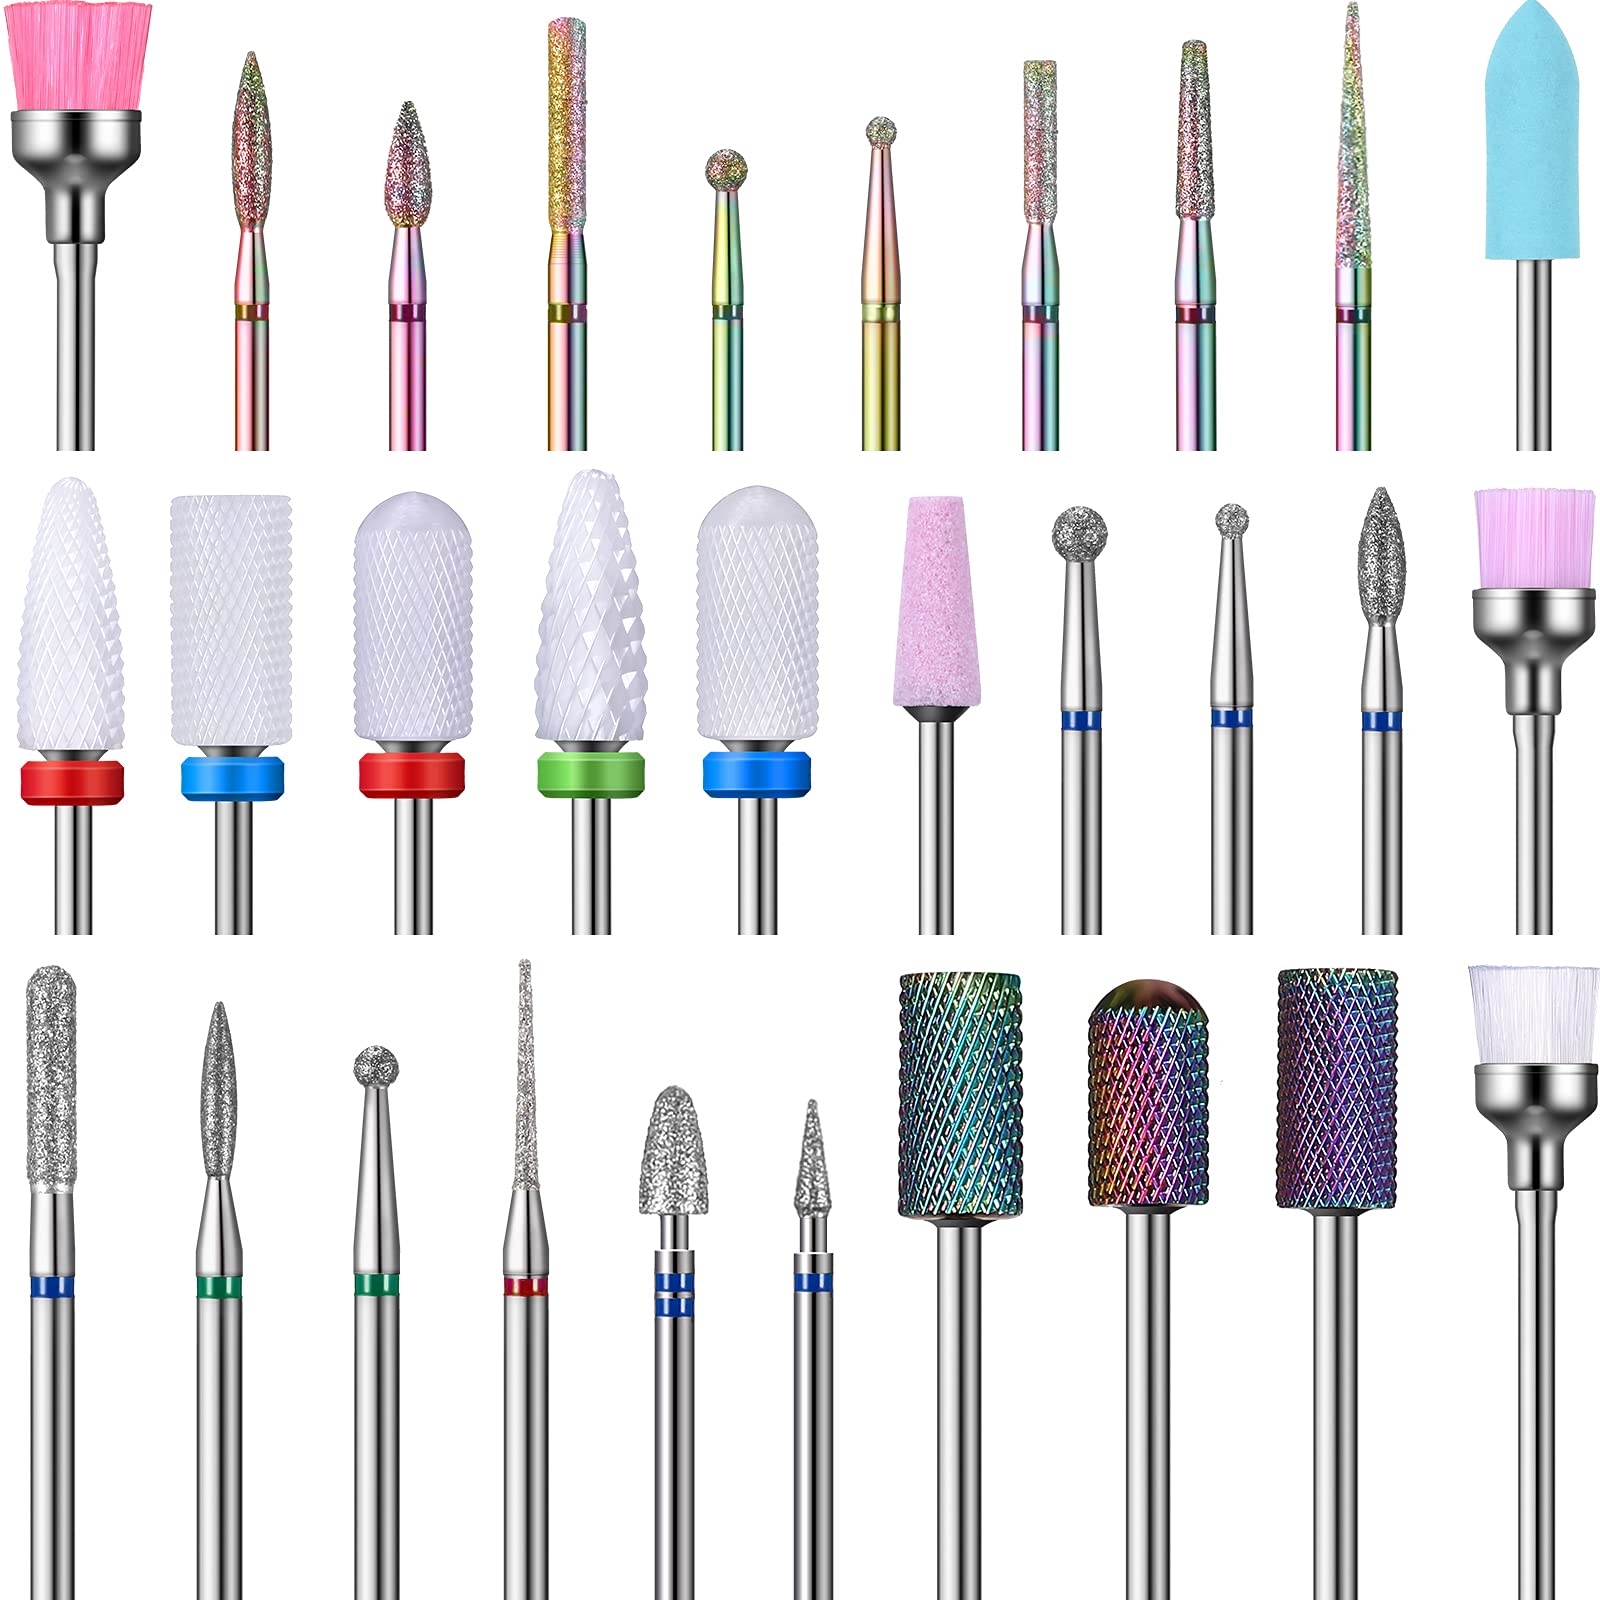 Buy Ceramic Nail Drill Bits - Professional Manicure Pedicure Nail Art  Tool,Less Dust Acrylic Nail File Drill Bit for Nail Polishing - Best Ceramic  Cylinder Shape Grinding Head(23ST) Online at Low Prices